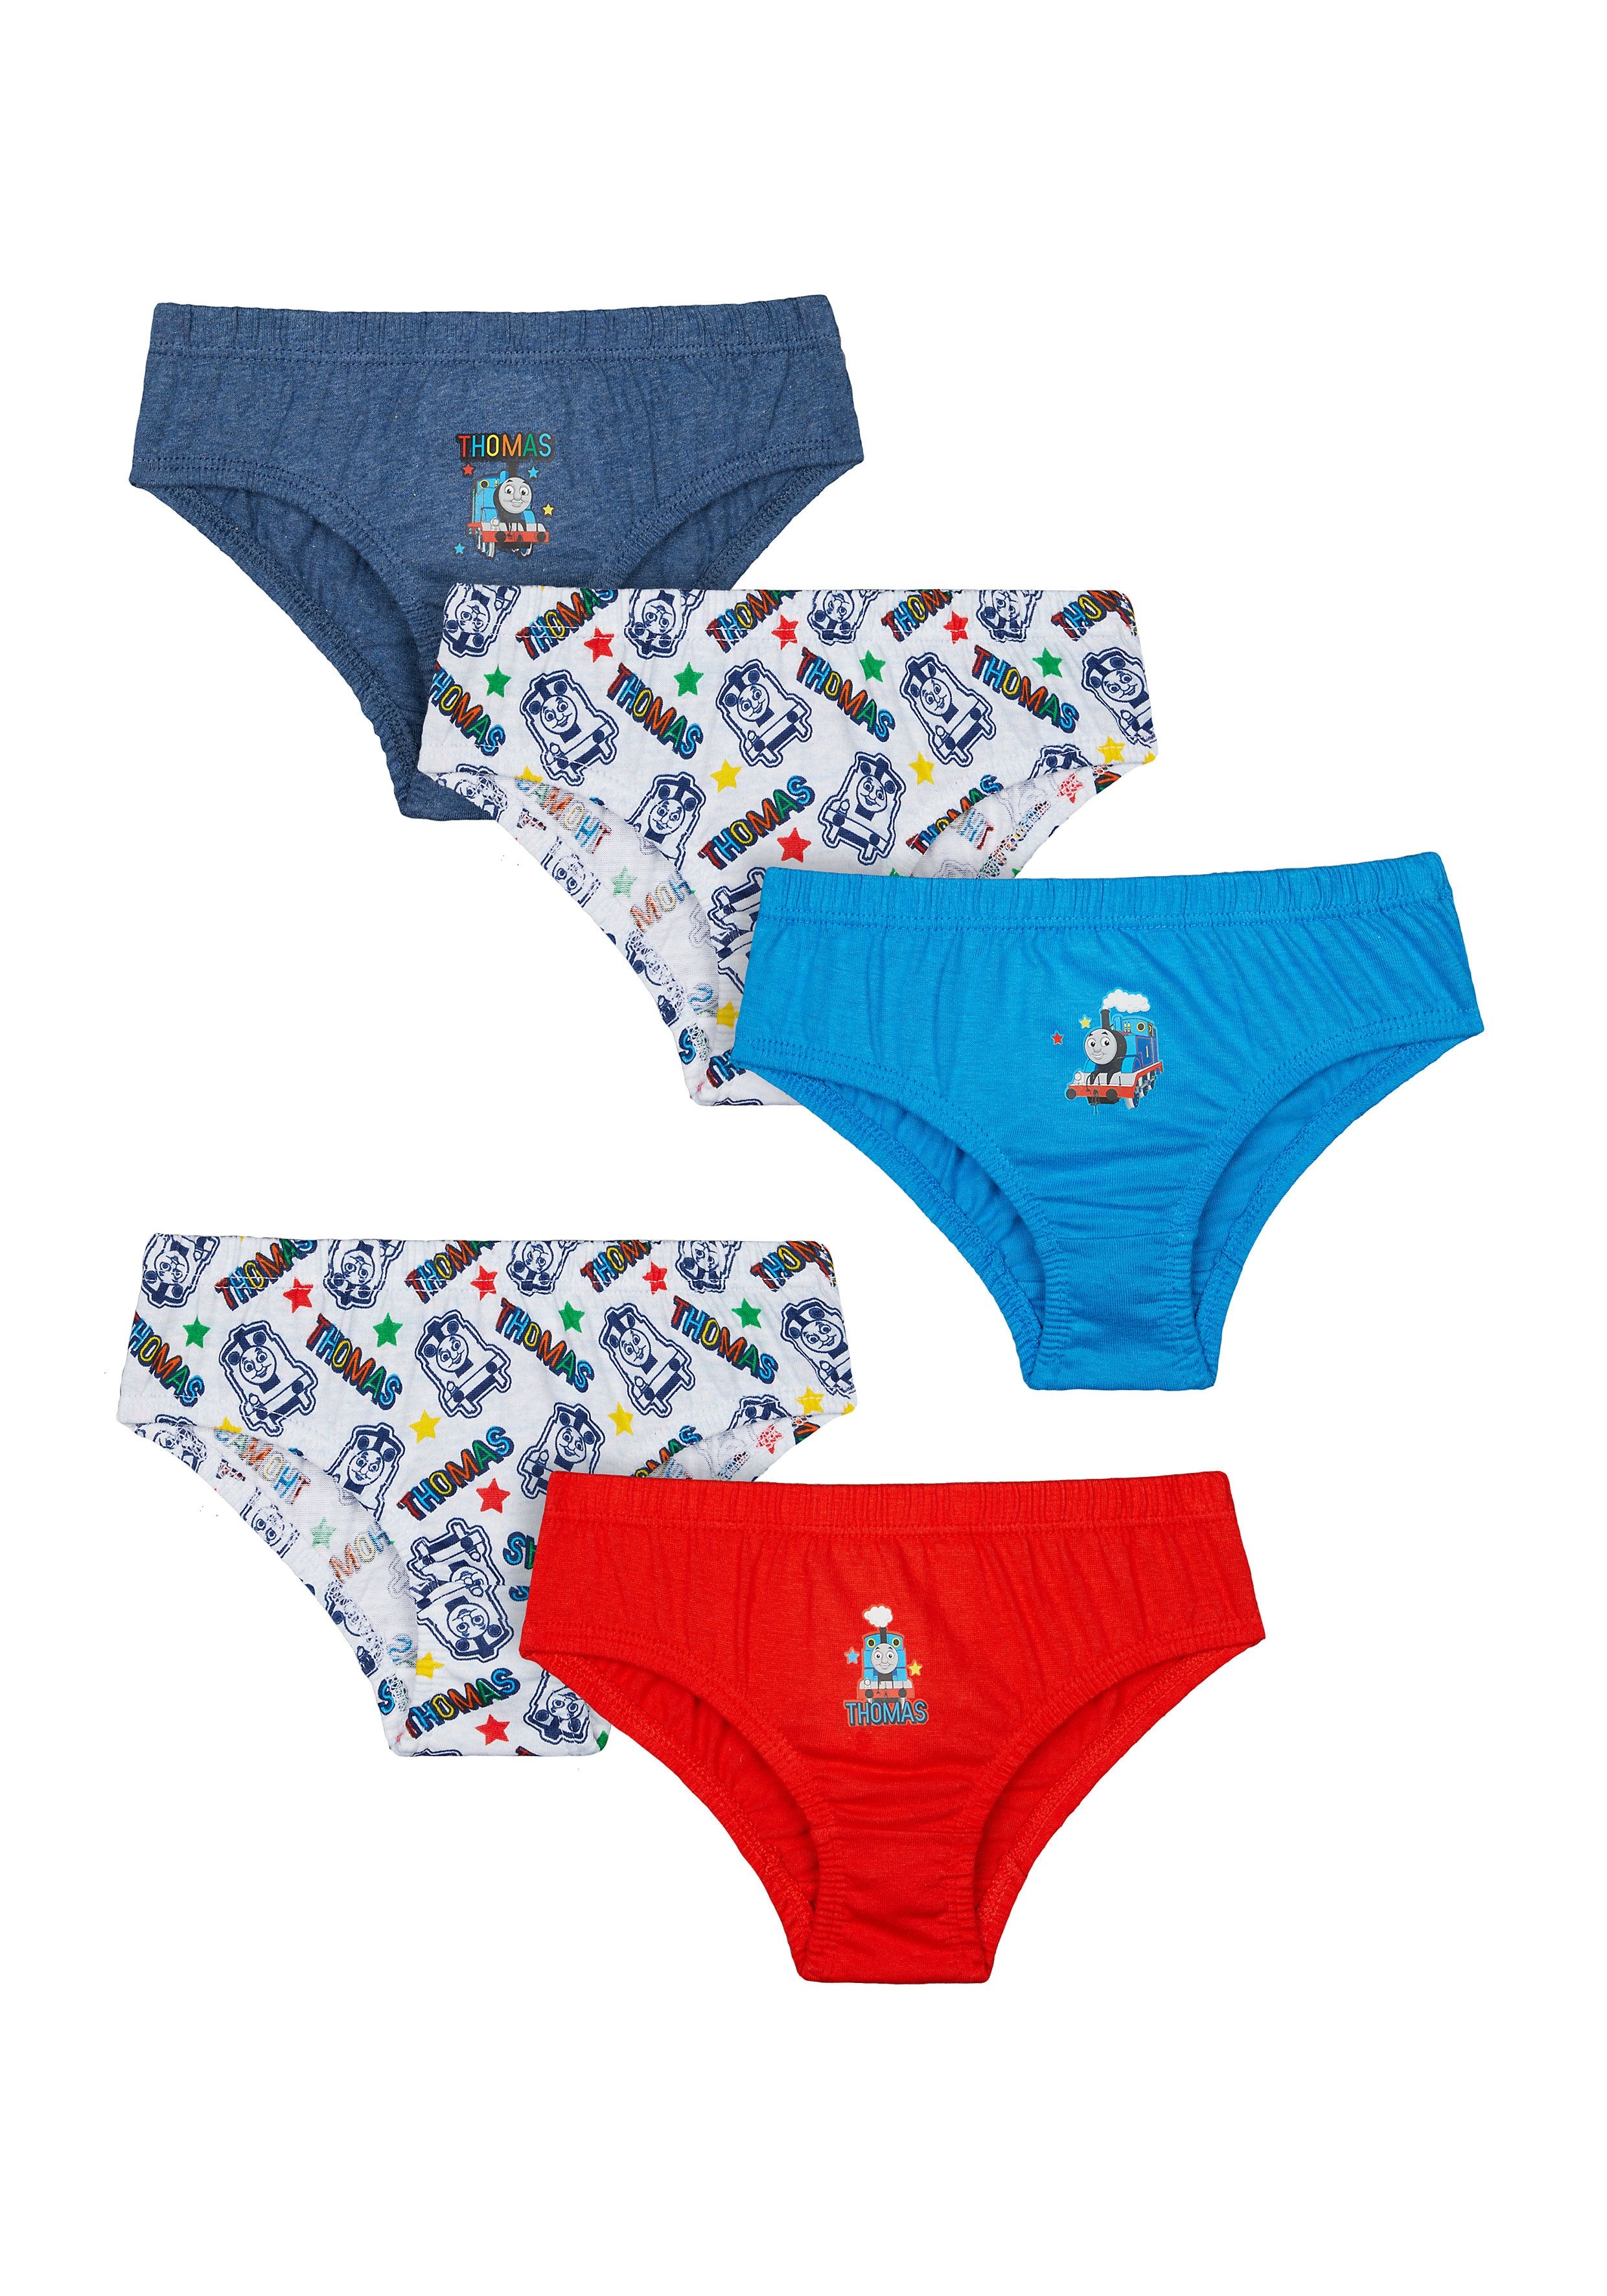 Mothercare | Boys Thomas The Tank Engine Briefs - 5 Pack - Blue